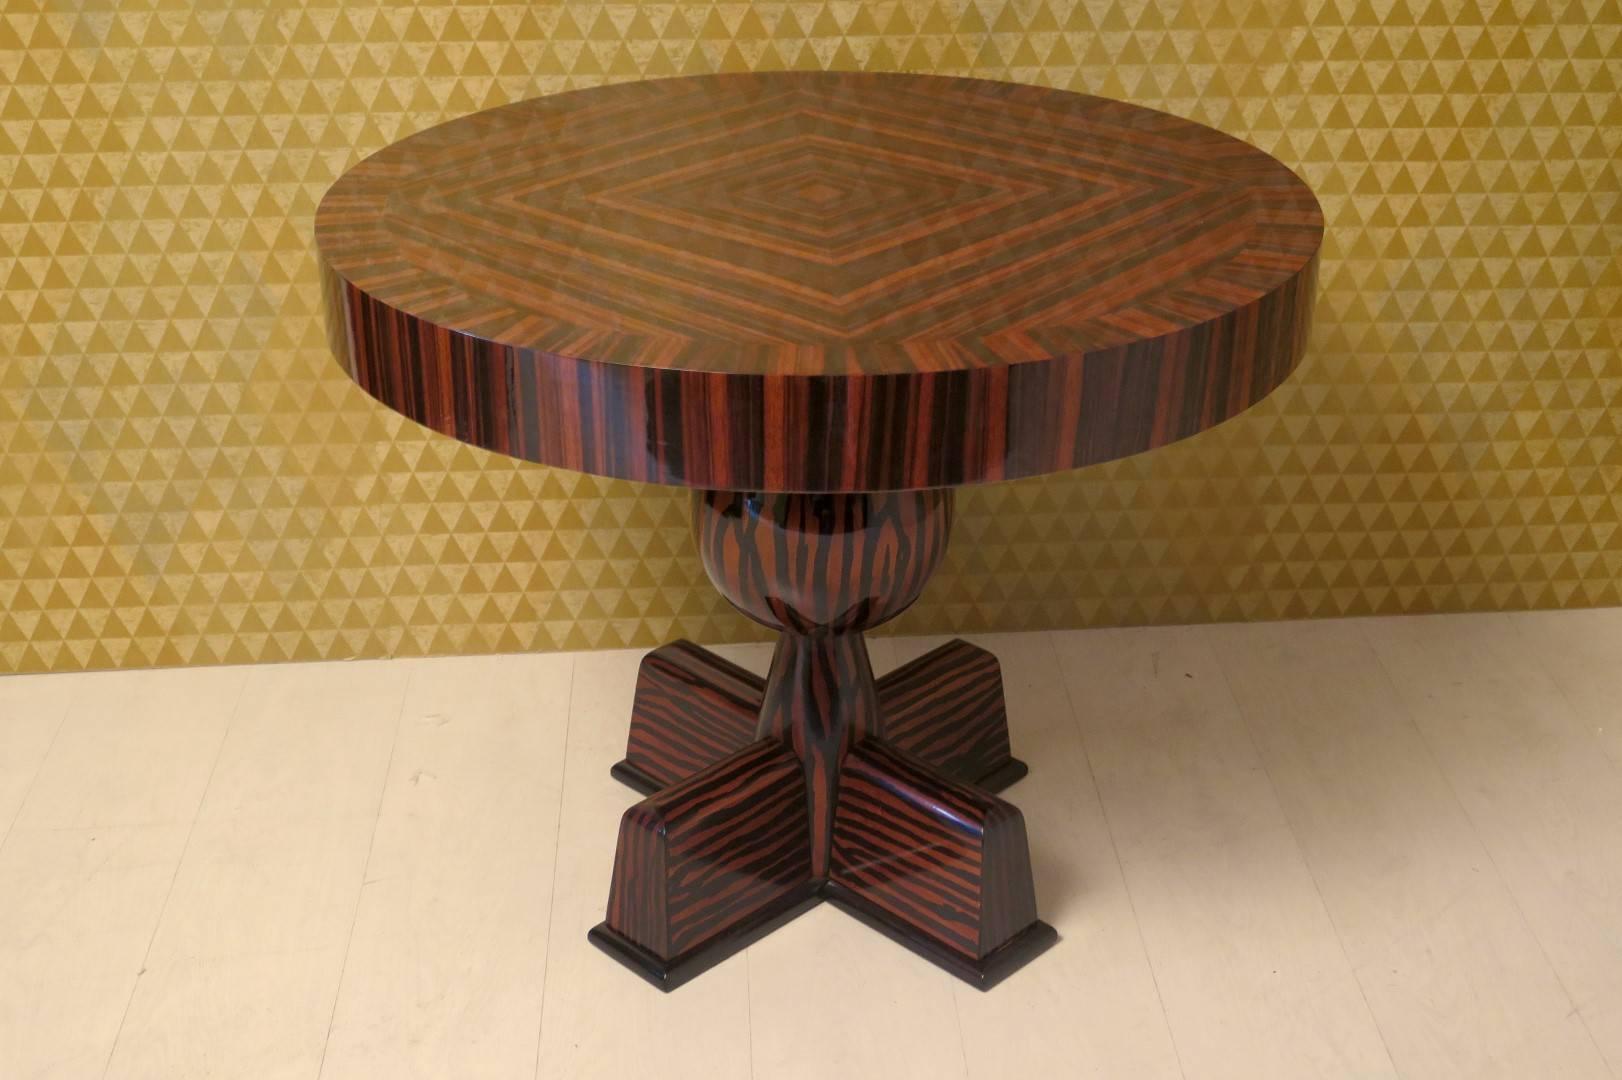 Art Deco italian side table from 1940. All veneered in ebony macassar wood. Round top with a high edge that runs all the way around. Under the top there is a central leg formed by a large sphere and four feet. Particular the design of the veneer on